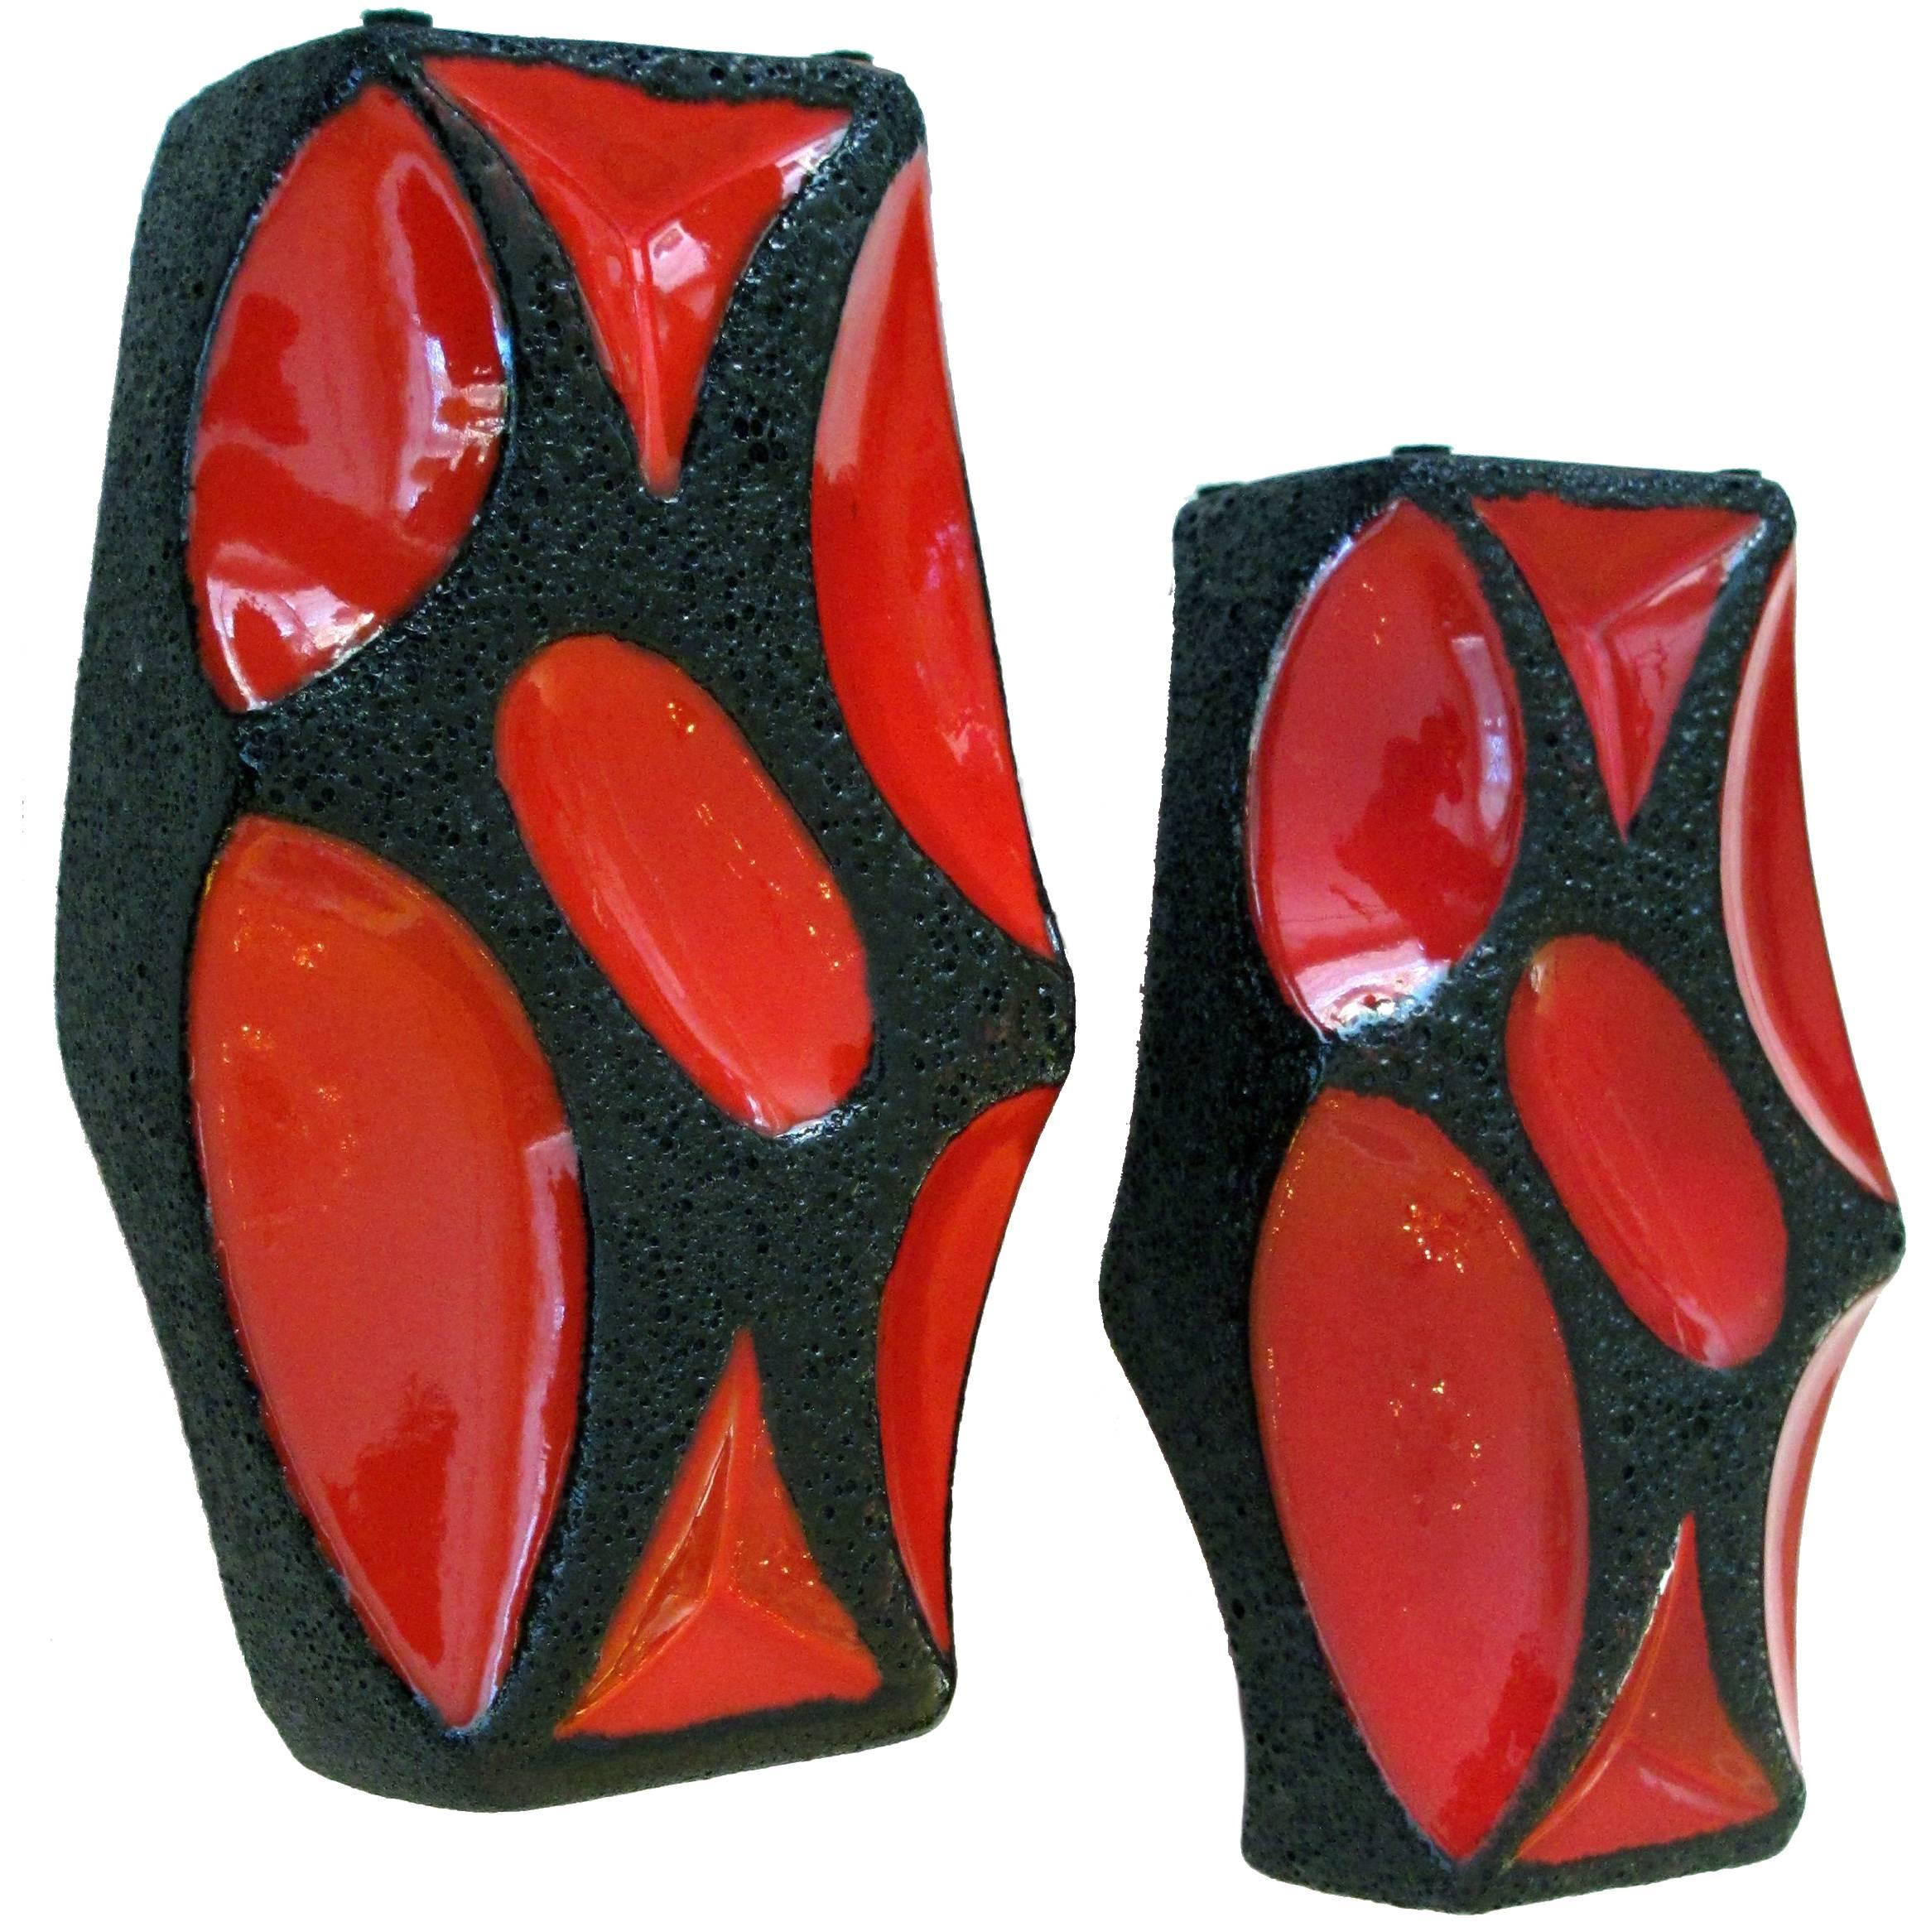 Mod Pair of West German Roth Keramik Art Pottery 'Fat Lava' Vases with Red Glaze